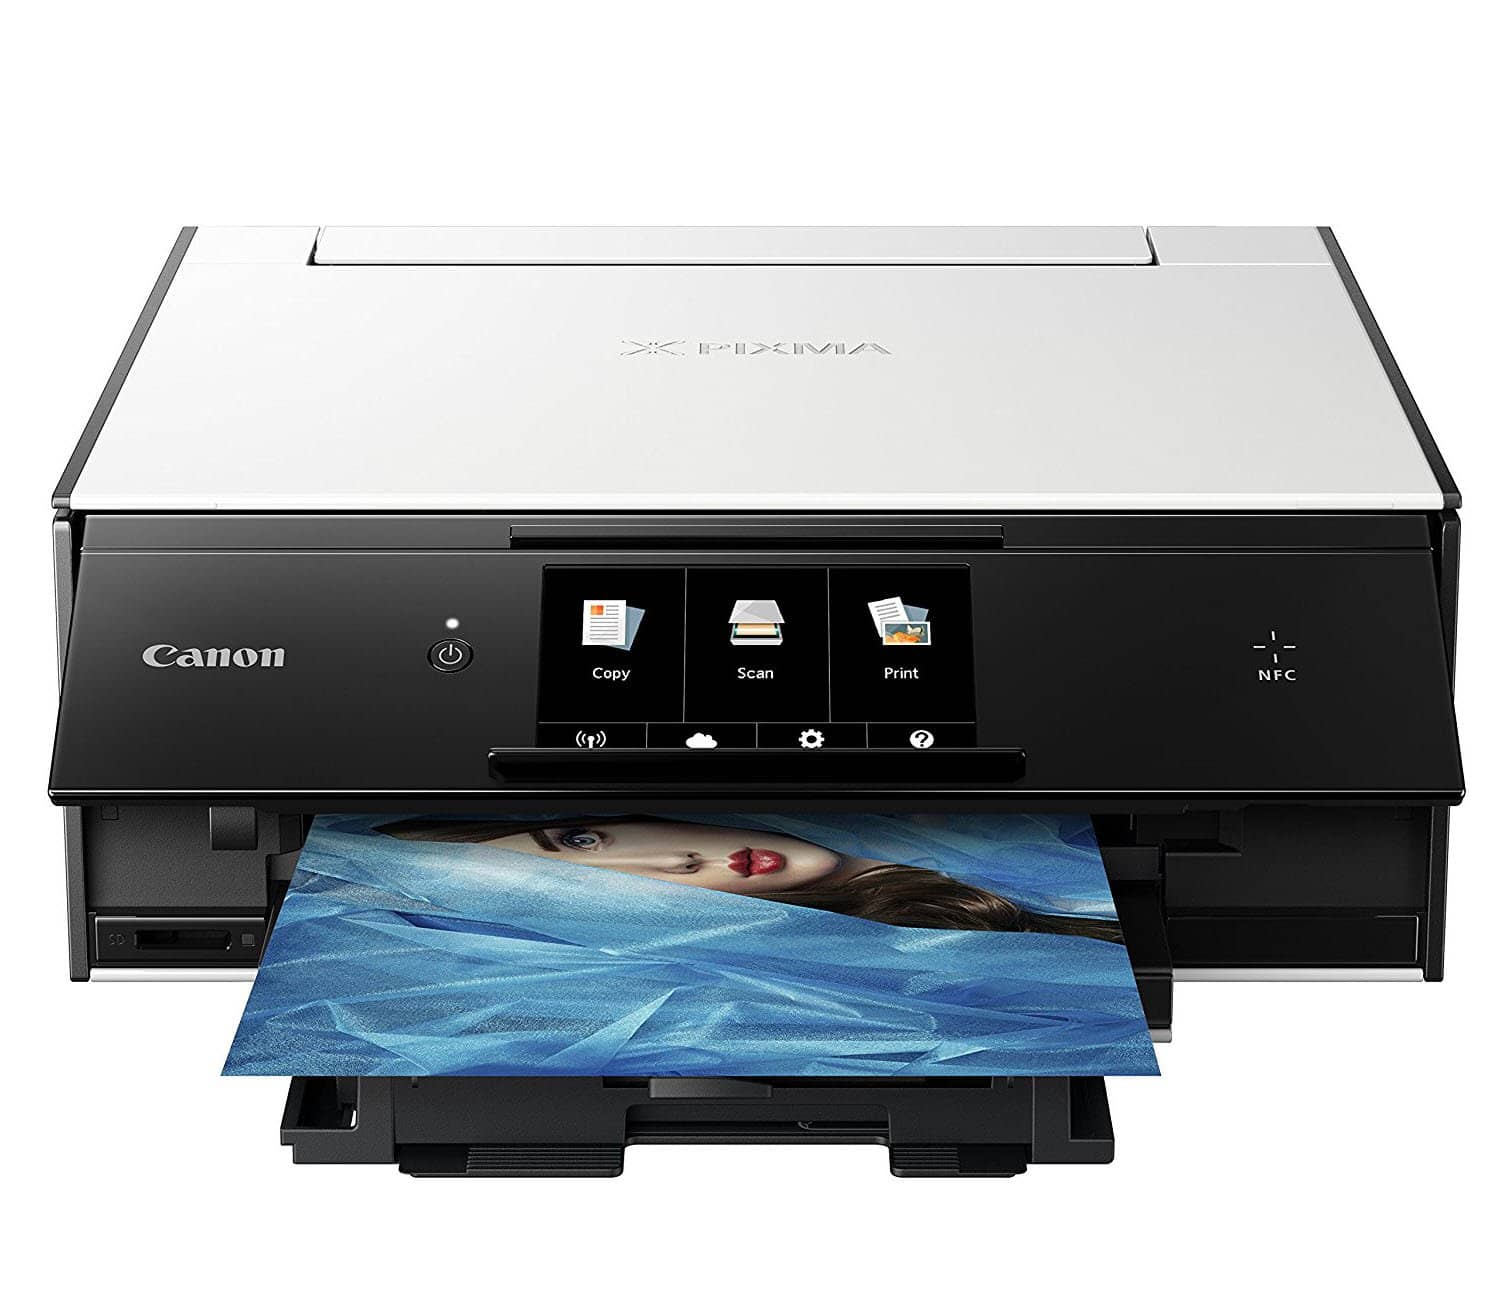 Canon TS9020 Wireless All-In-One Printer with Scanner and Copier - White